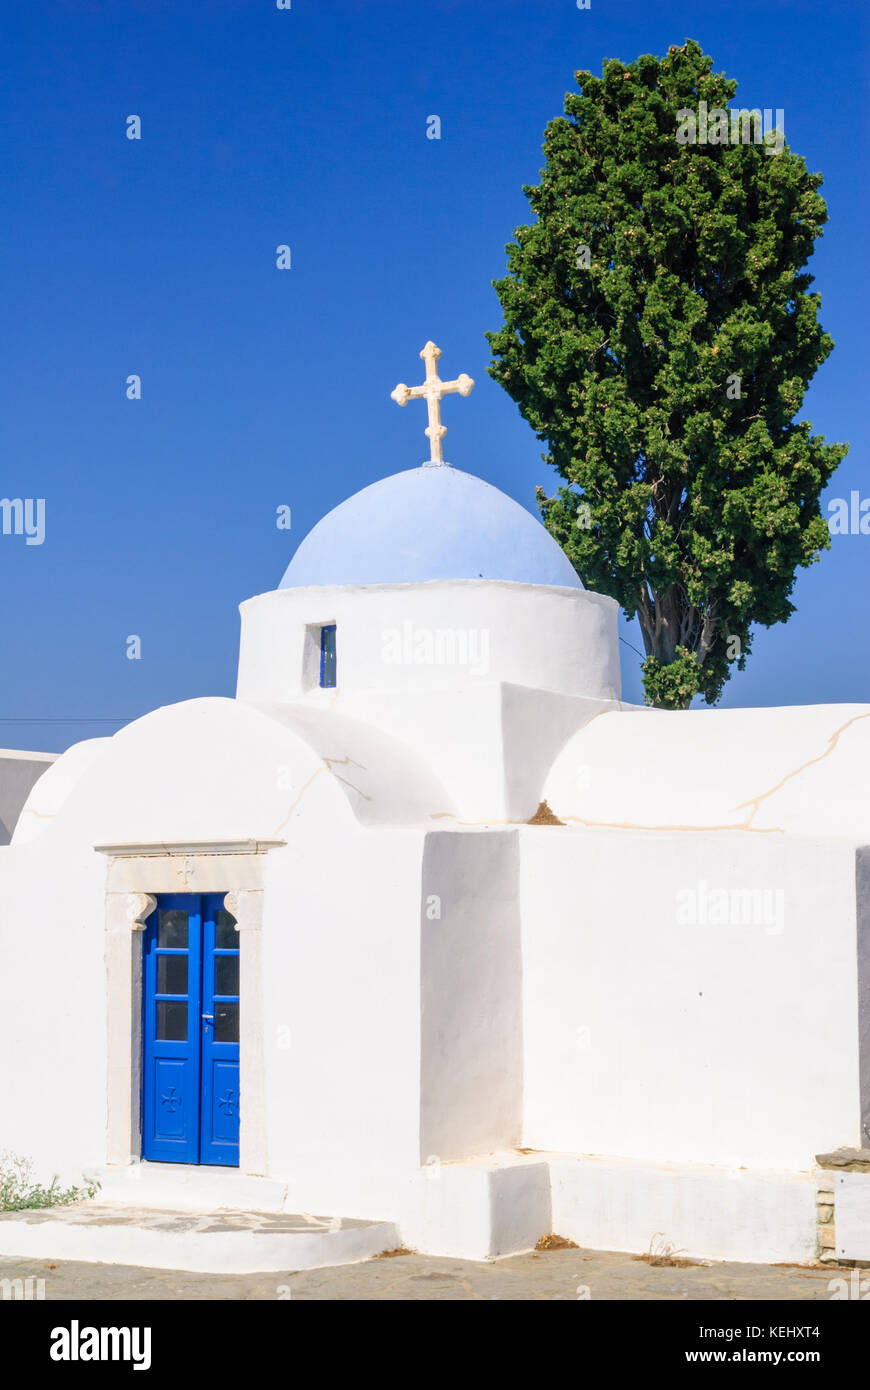 Whitewashed church with blue dome in the town of Naoussa, Paros, Greece Stock Photo